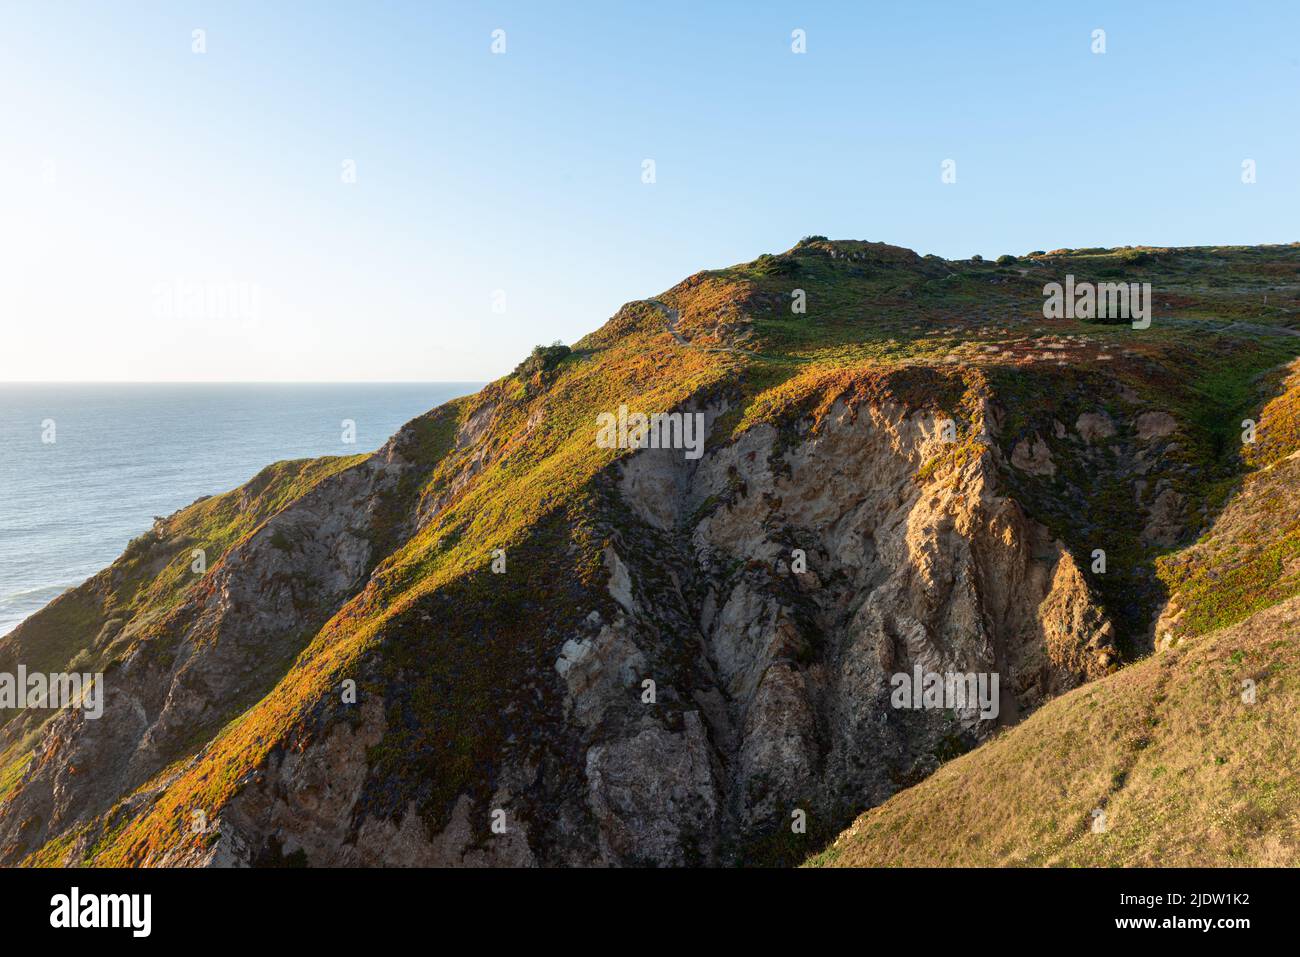 Coastal rocks and cliffs covered in green ground vegetation and spring flowers in bloom in the nature reserve area near Cabo da Roca in Portugal Stock Photo